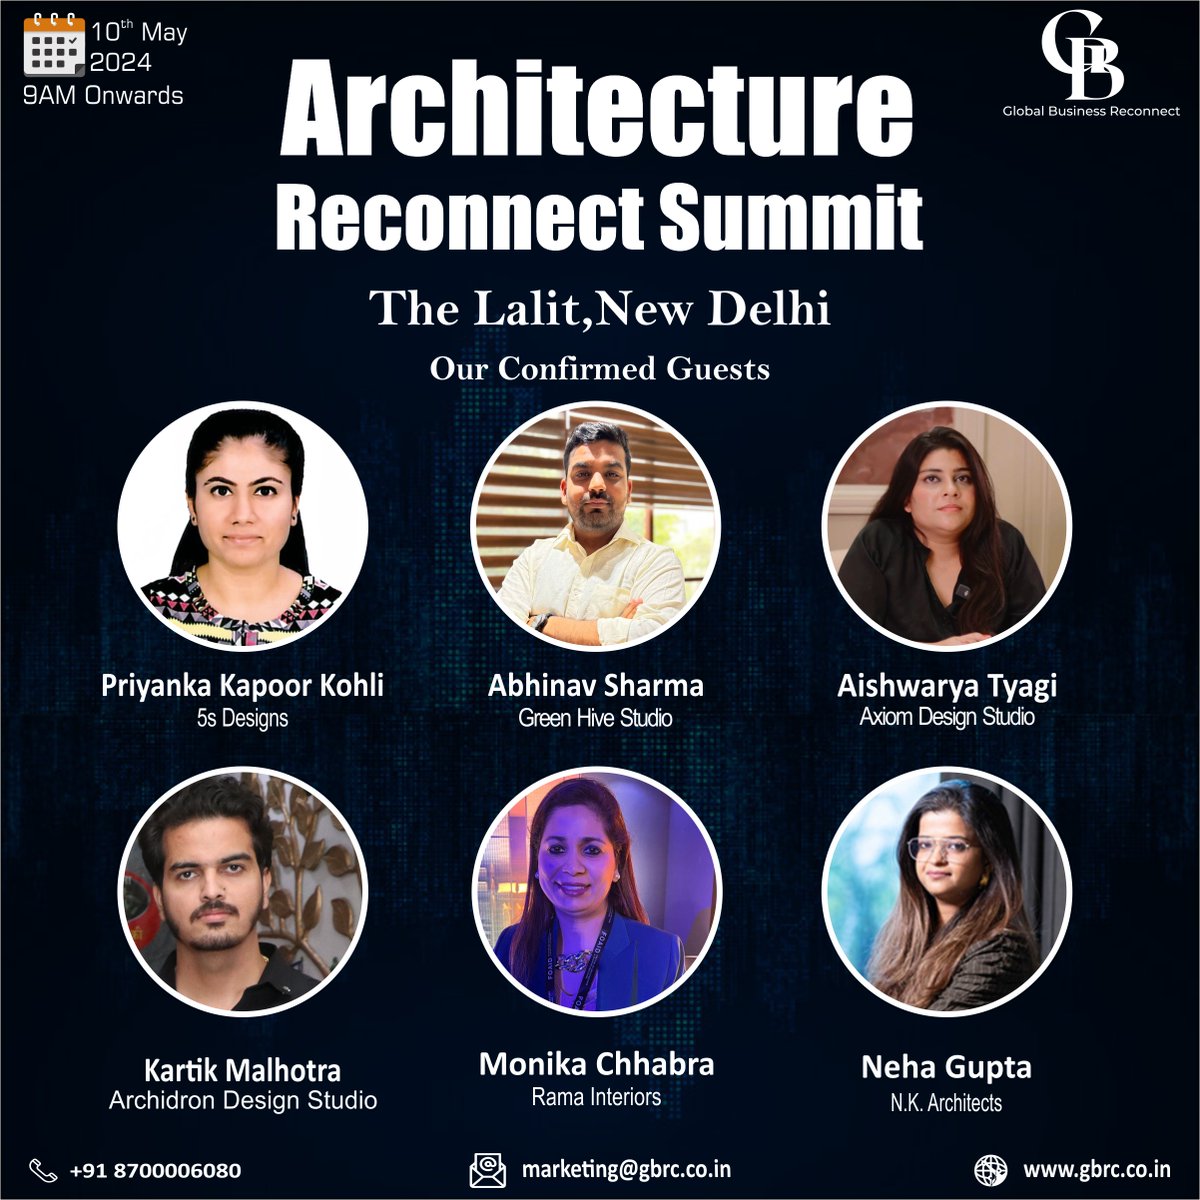 We welcome all our Eminent Guests for the Architecture Reconnect Summit.
This prestigious event promises to be a convergence of visionary minds, shaping the future skyline with innovation and imagination

🔹 Date: 10th May 2024
🔹 Venue: The Lalit, New Delhi

#GBRC #b2bconference